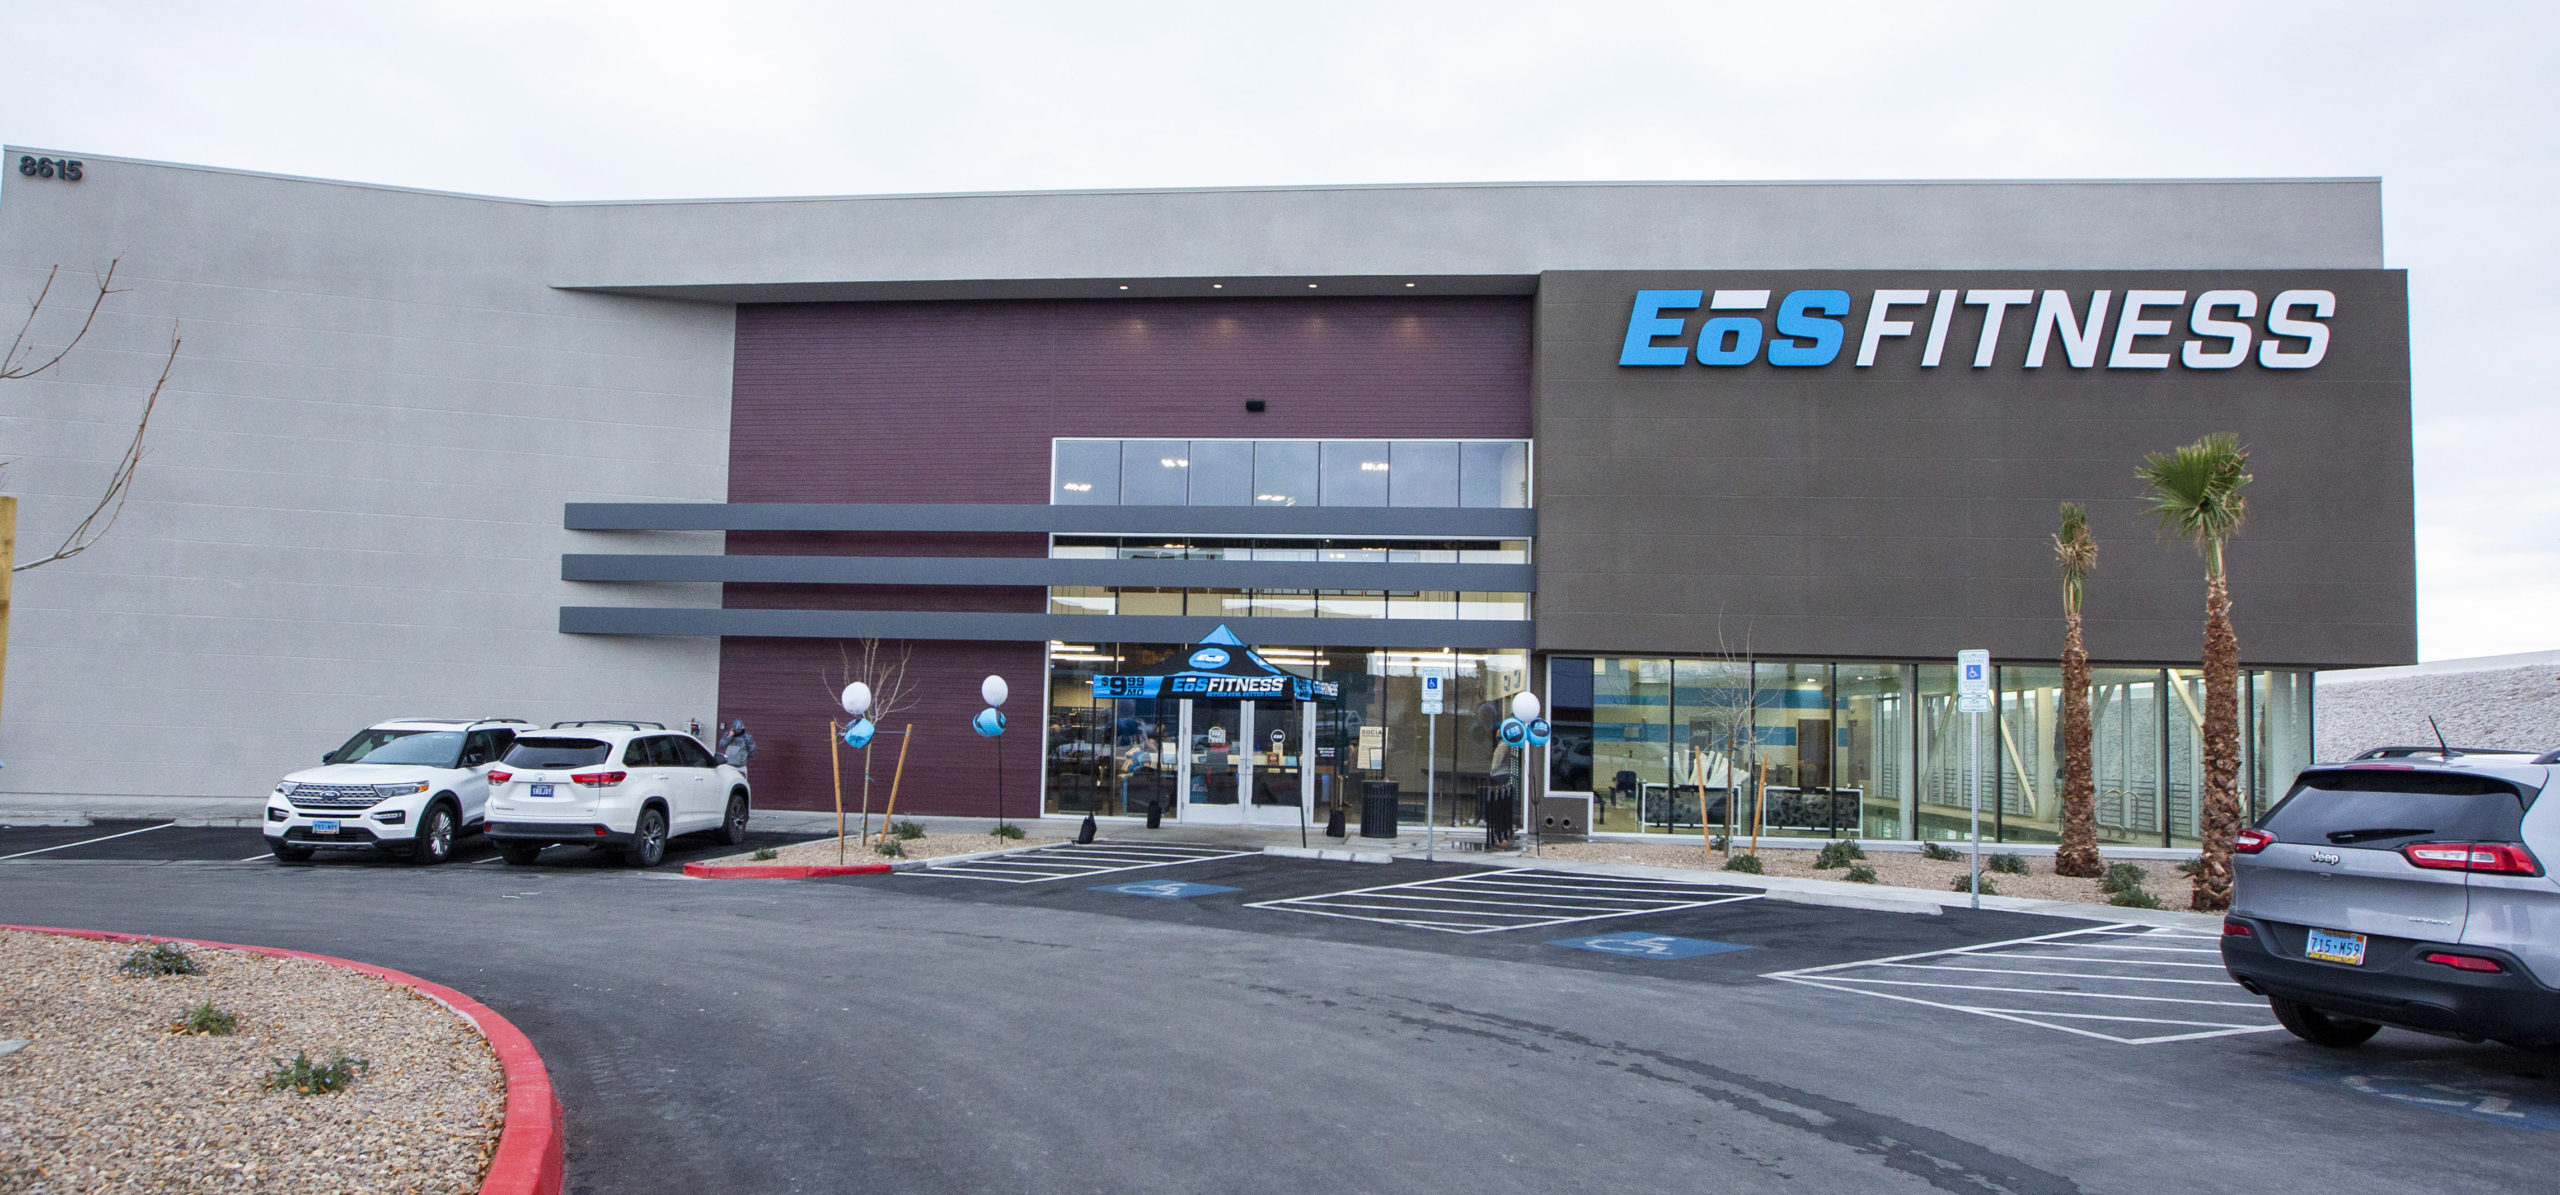 EōS Fitness Takes the Stage with Two New Show Stopping Locations in Las